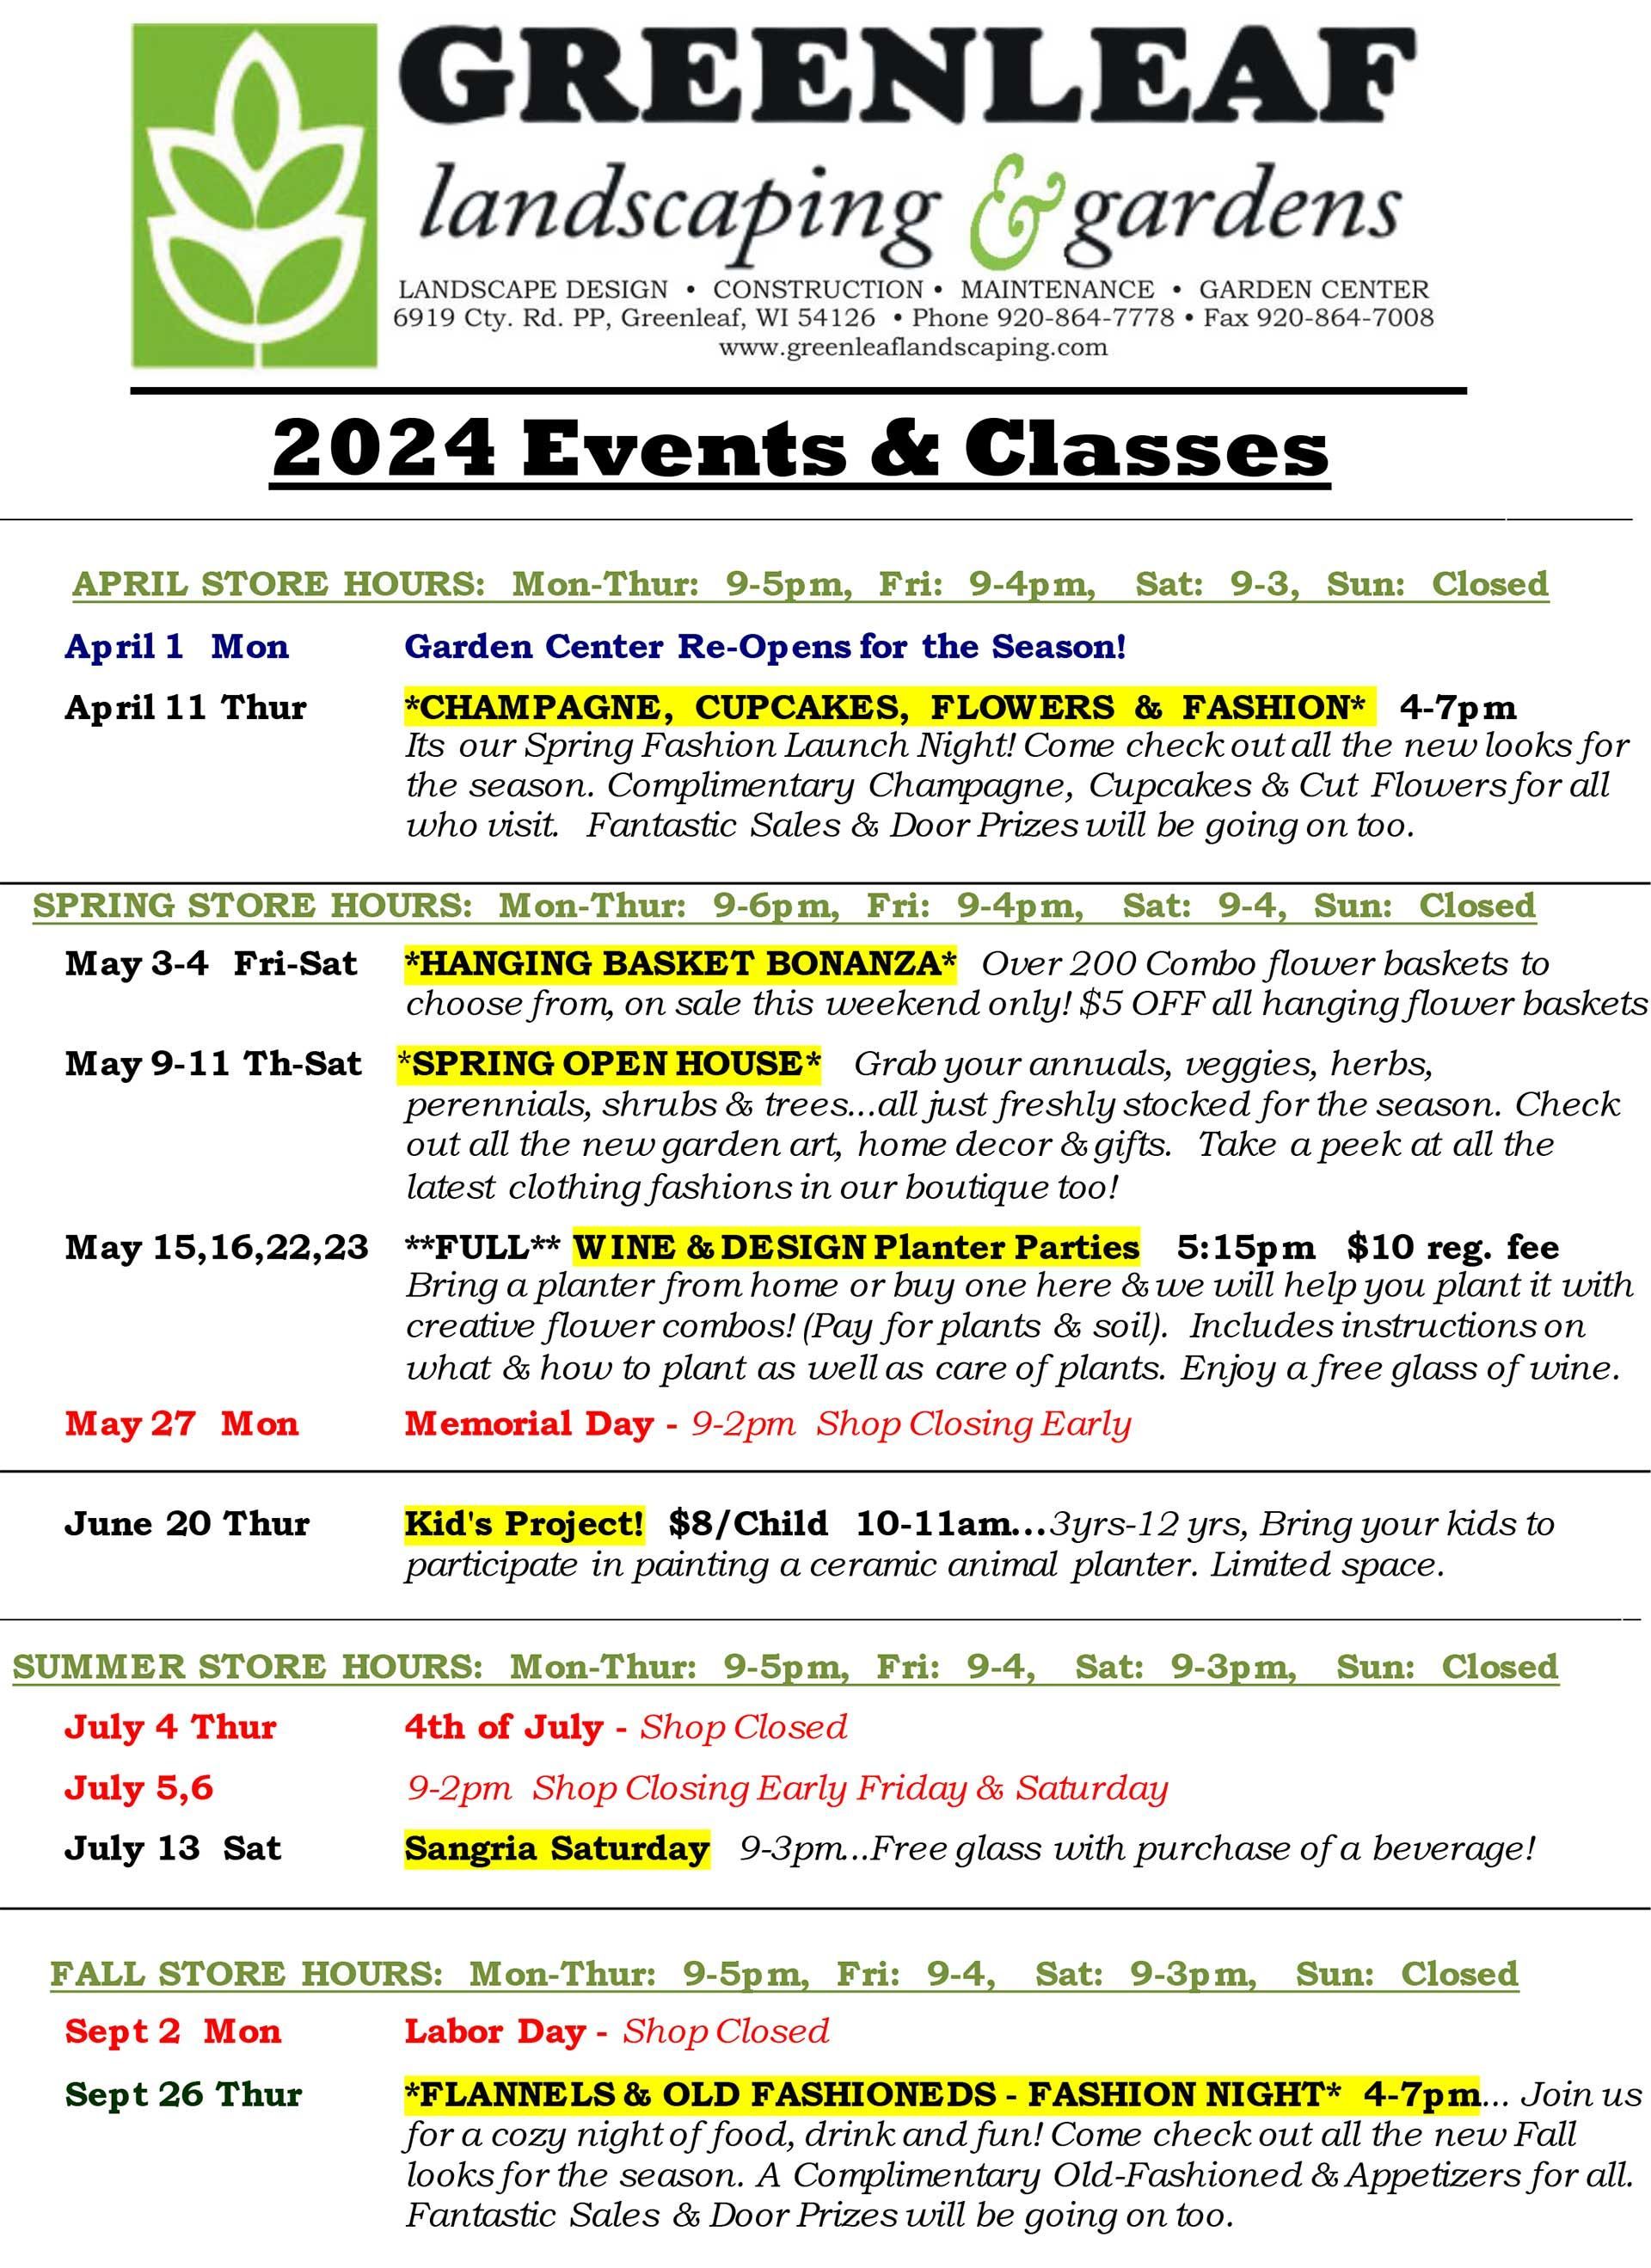 2024 events and classes